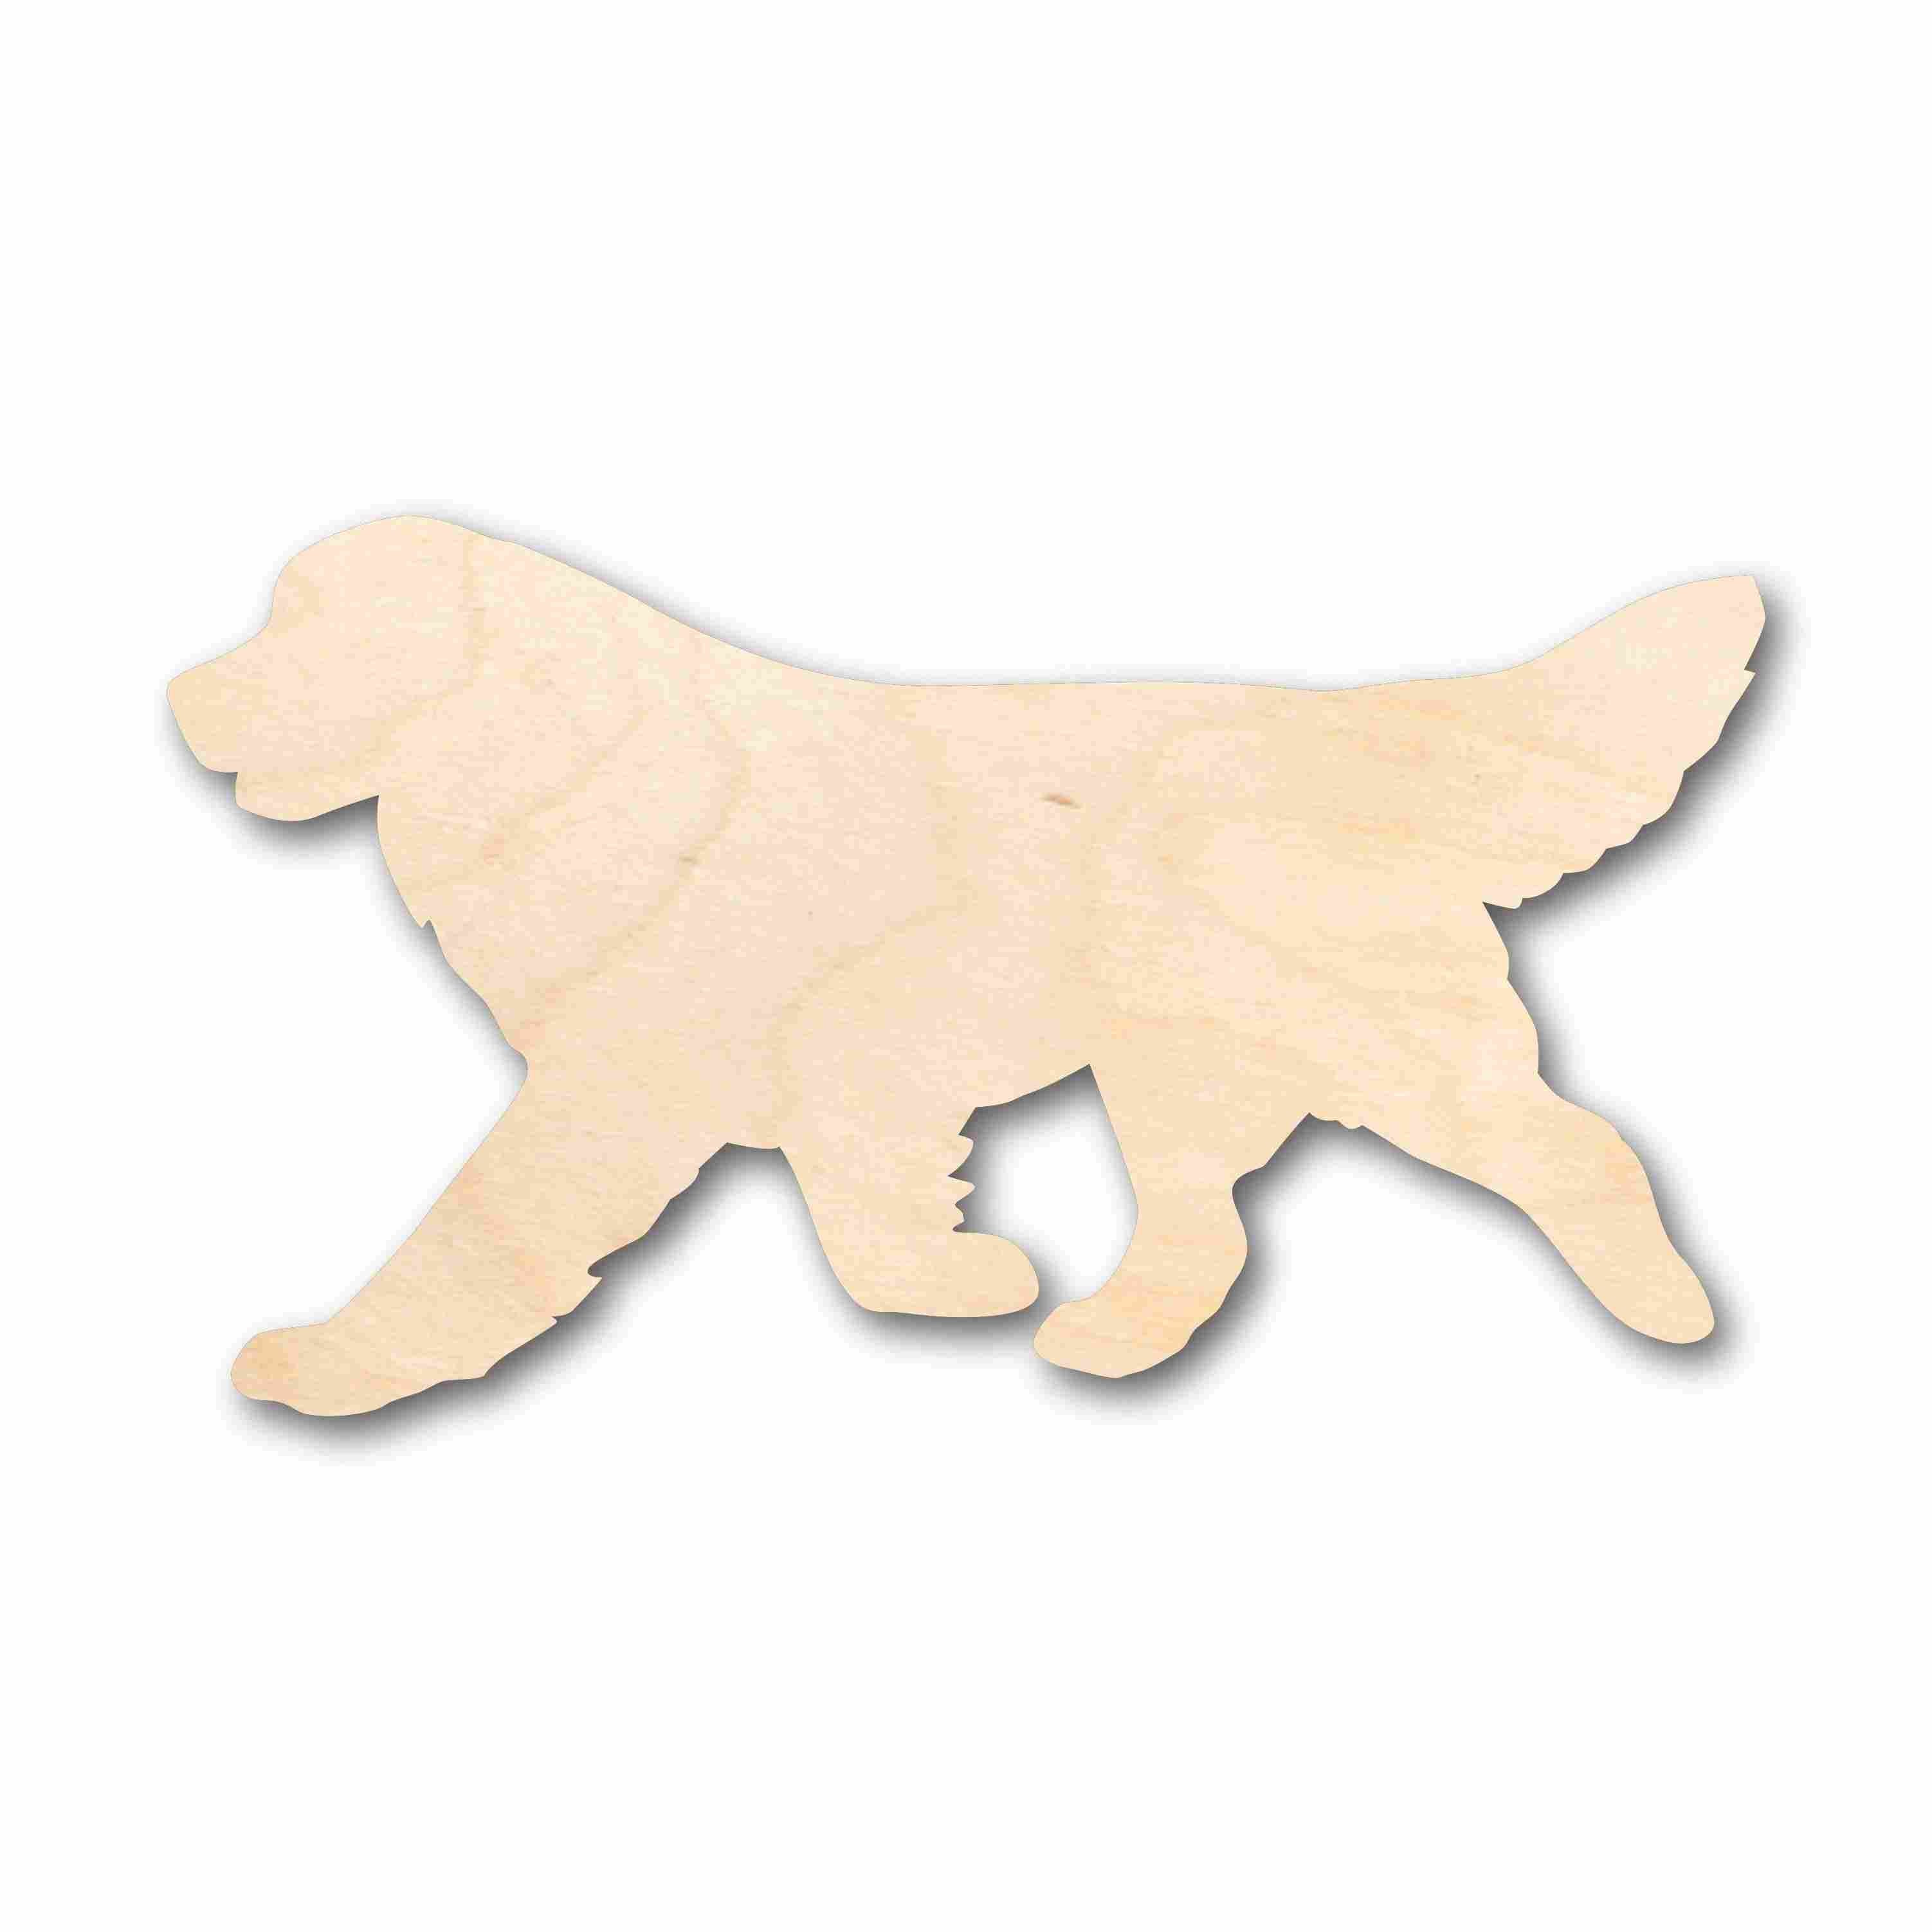 Unfinished Wood Golden Retriever Dog Silhouette - Craft- up to 24